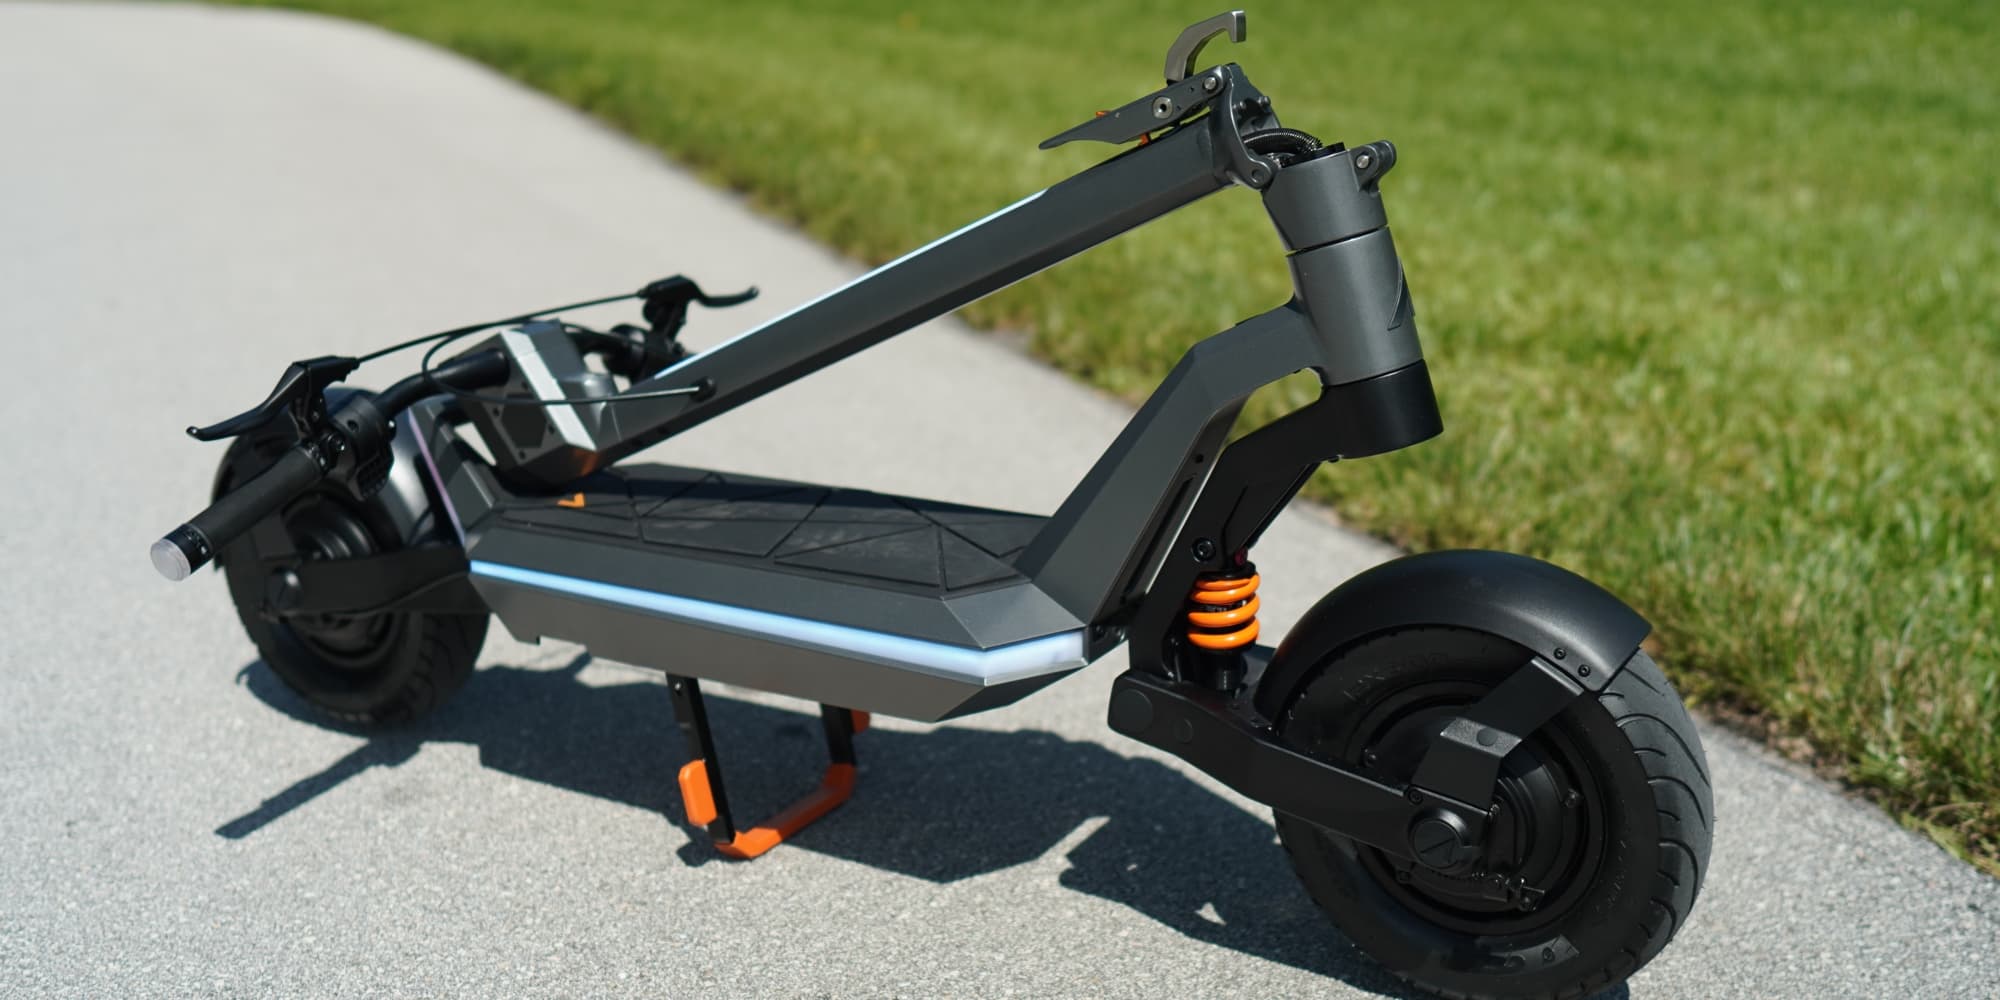 Apollo Pro electric scooter review: 45 mph worth of tech riding!